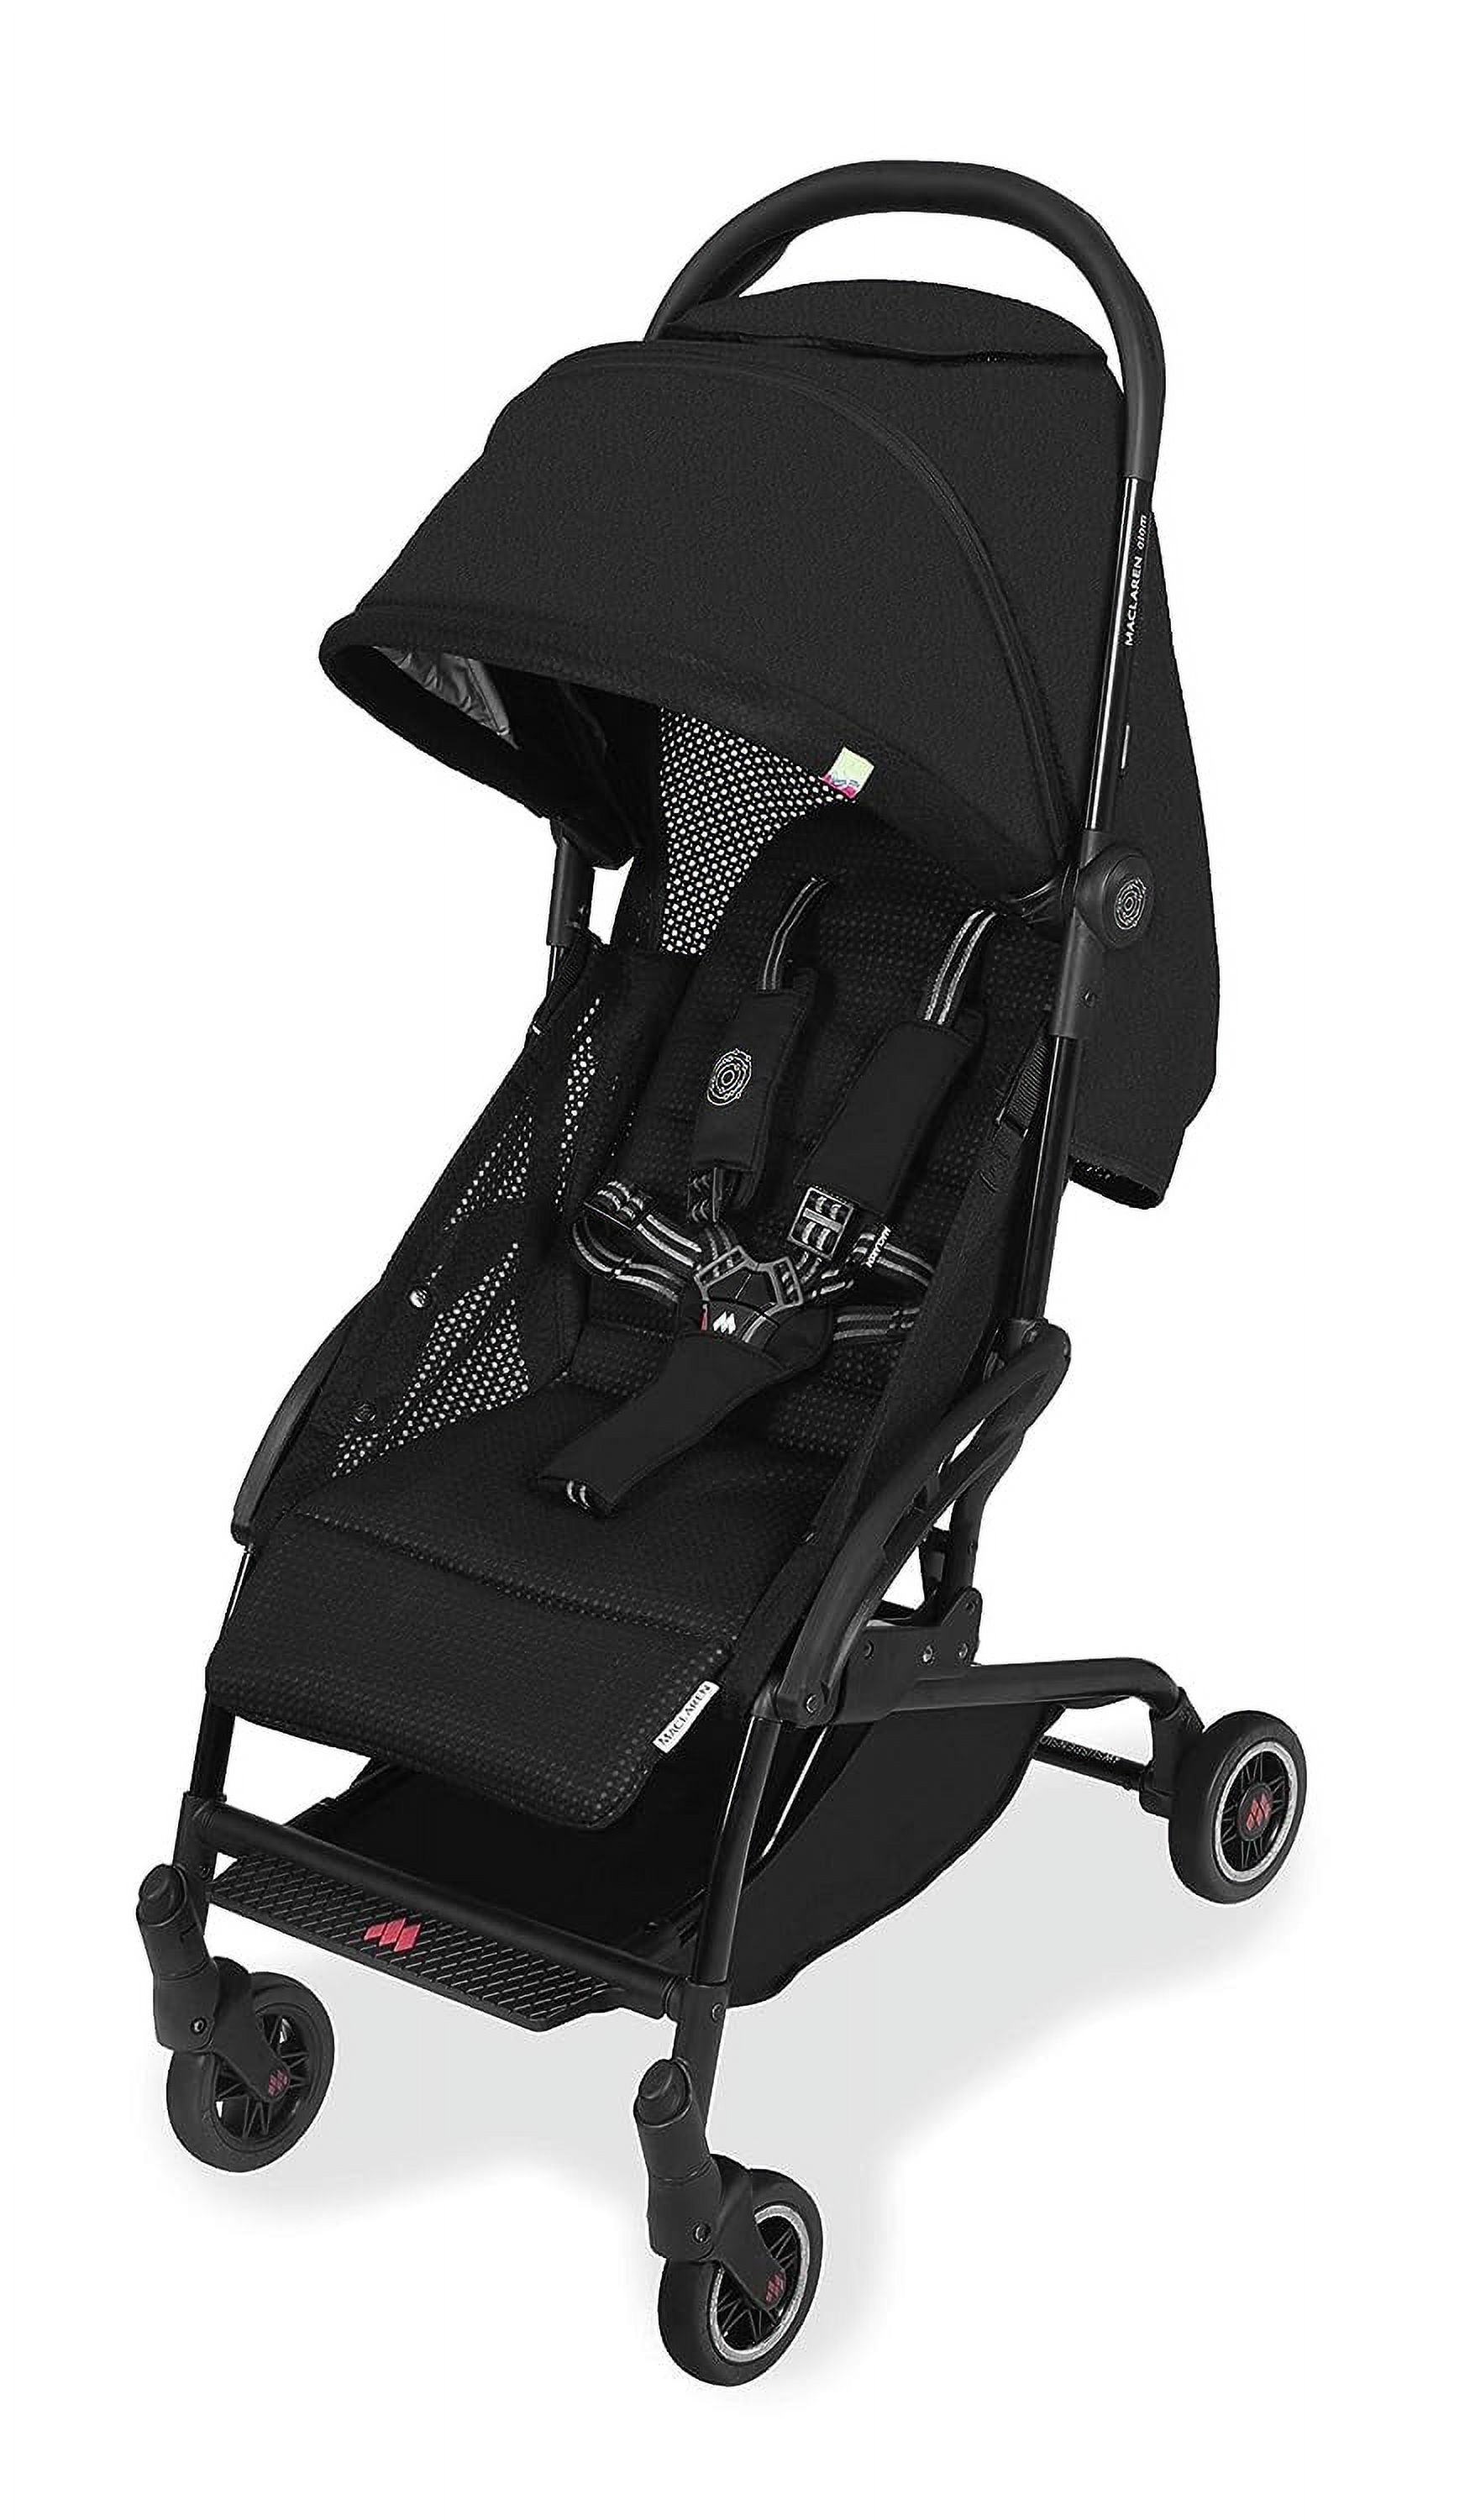 Maclaren Atom Style Set Travel System- Super Lightweight, Ultra-Compact Stroller, Fits On Airplane's Overhead Storage. Car Seat Compatible. Loaded with Accessories. Multi-Position Reclining Seat - image 1 of 6